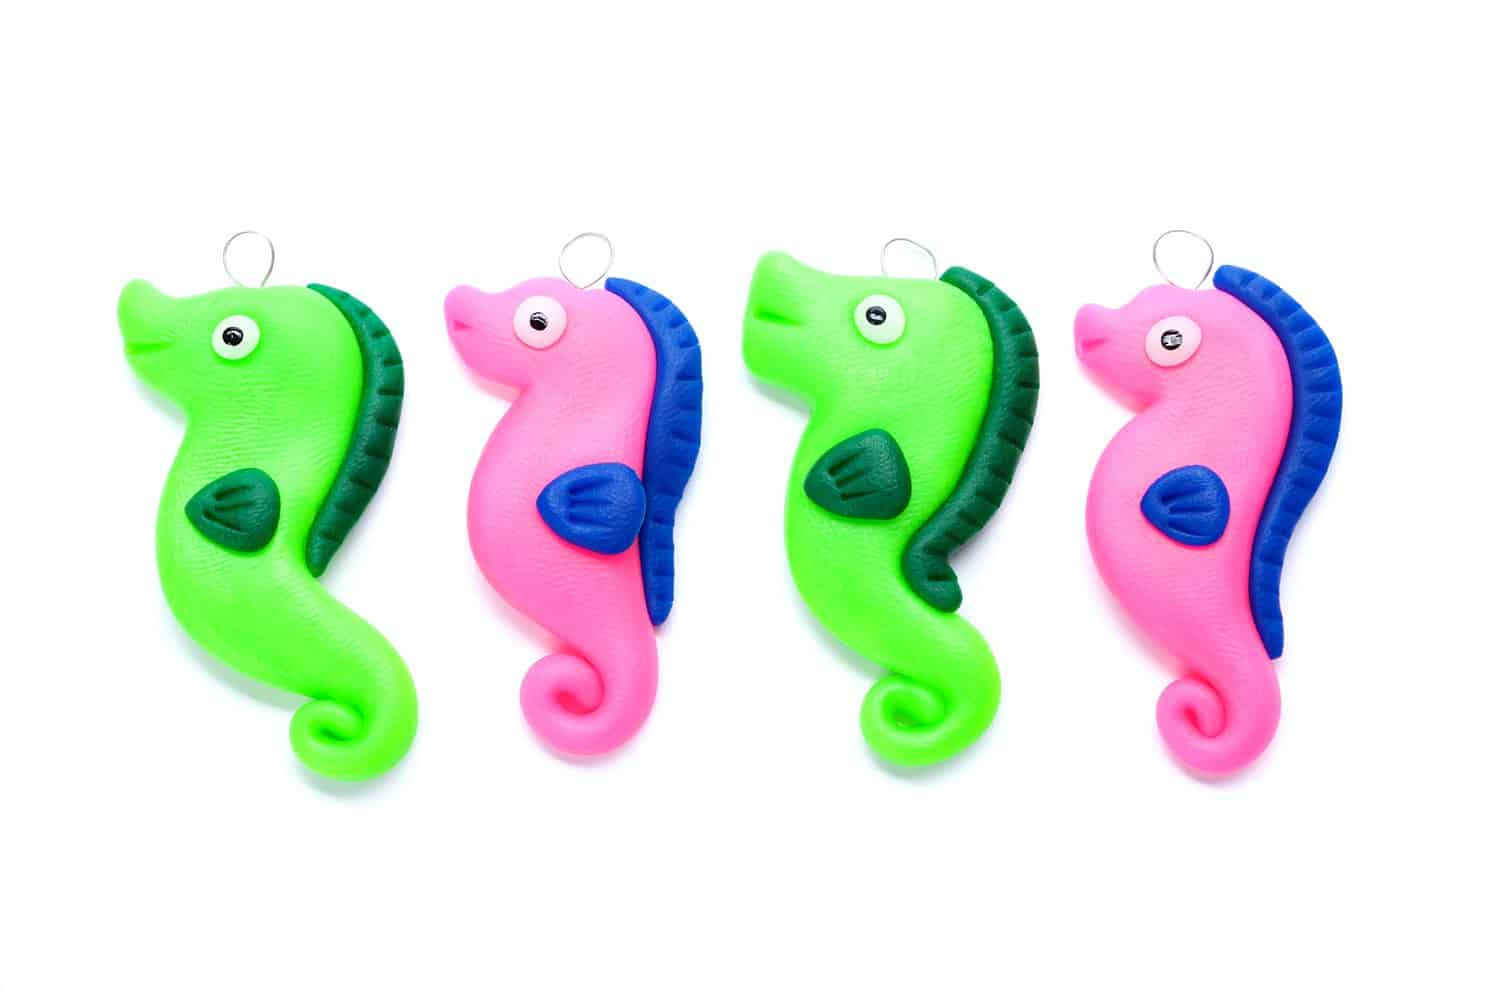 Seahorses made of polymer clay